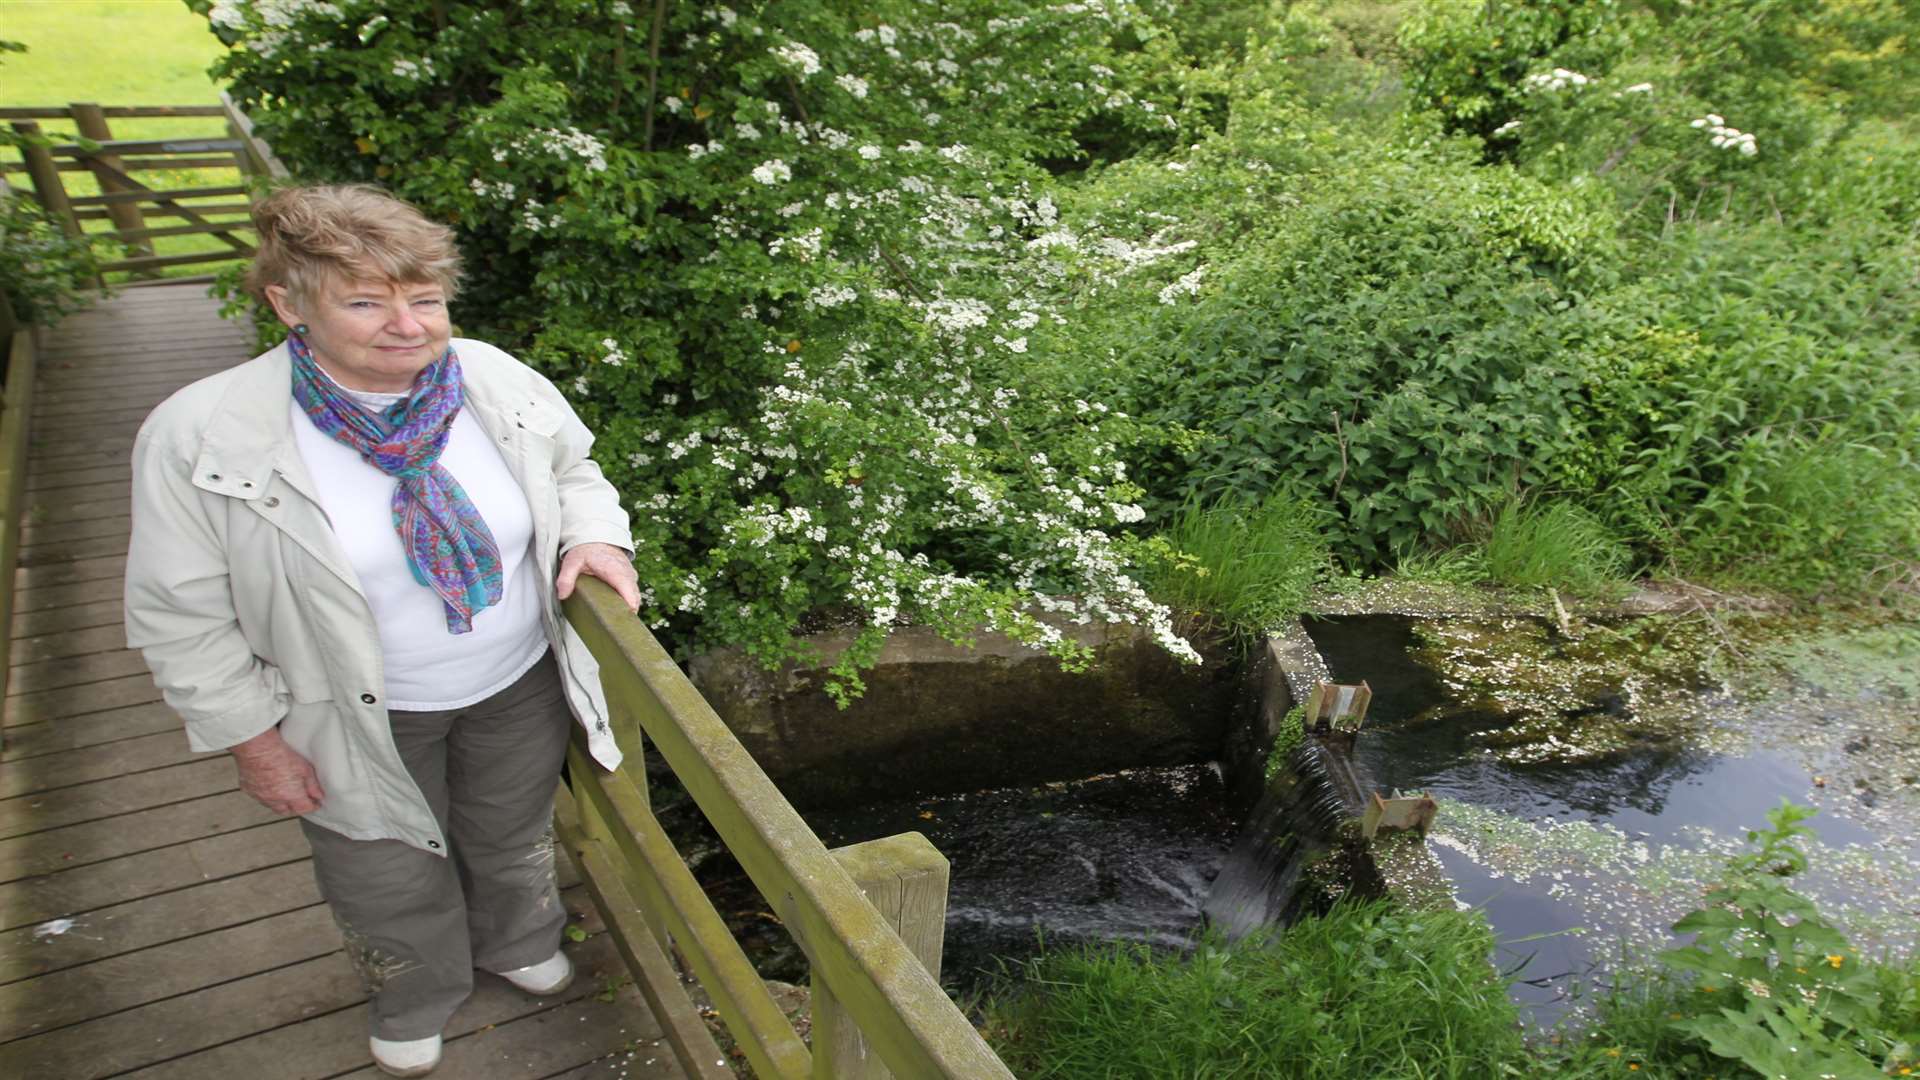 Lesley Feakes, Chairman of Lenham Heritage, at the source of the River Stour in Lenham